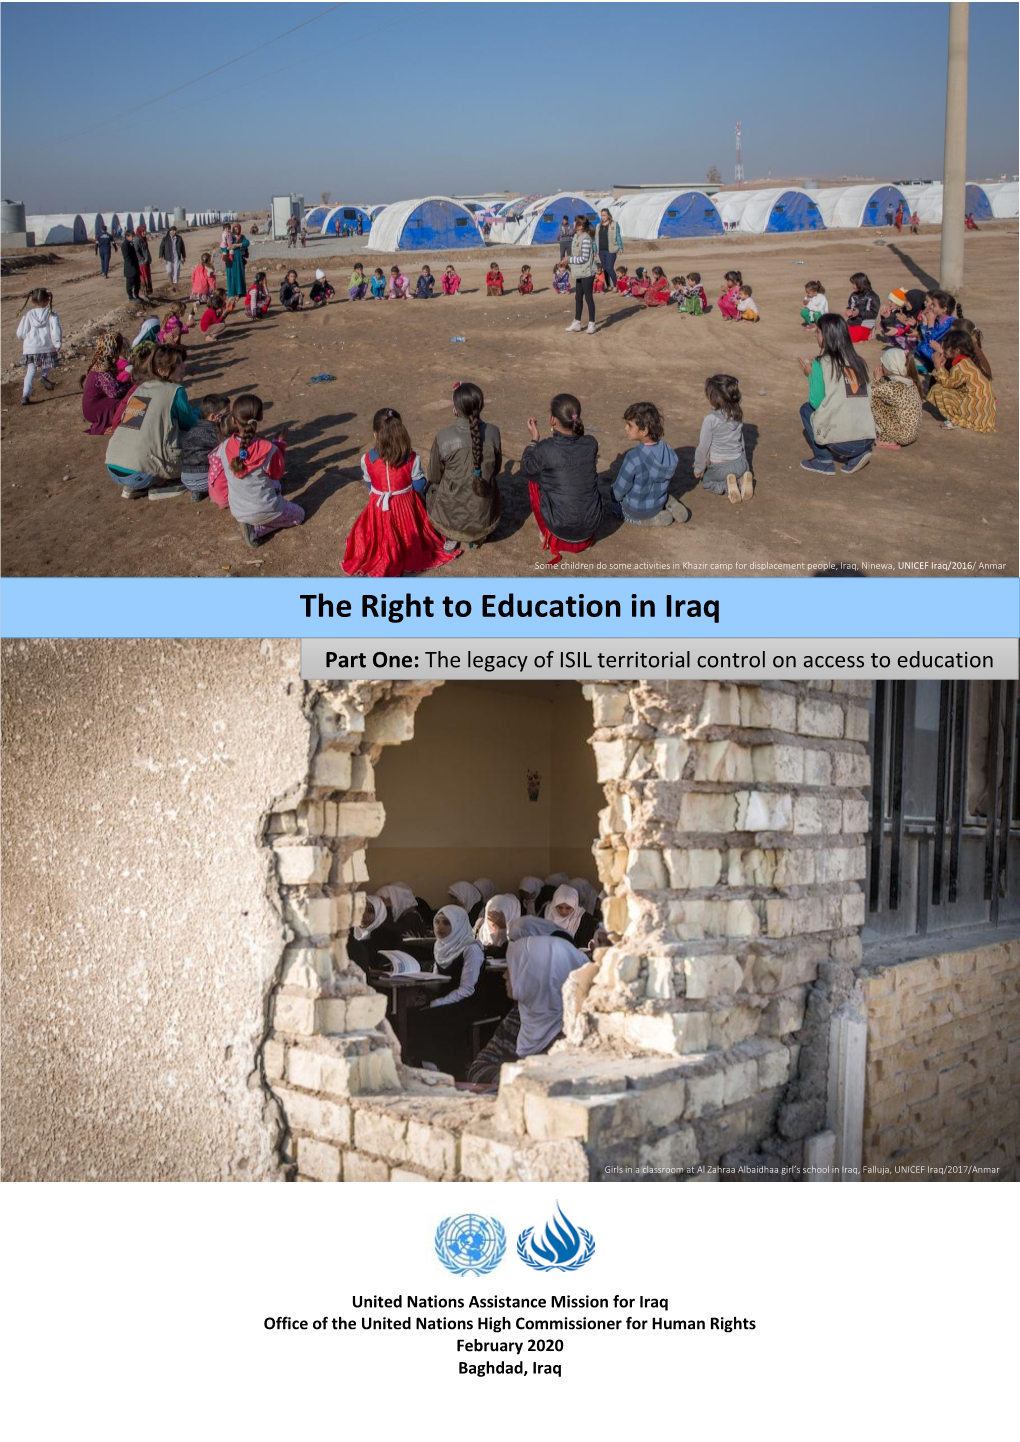 The Right to Education in Iraq